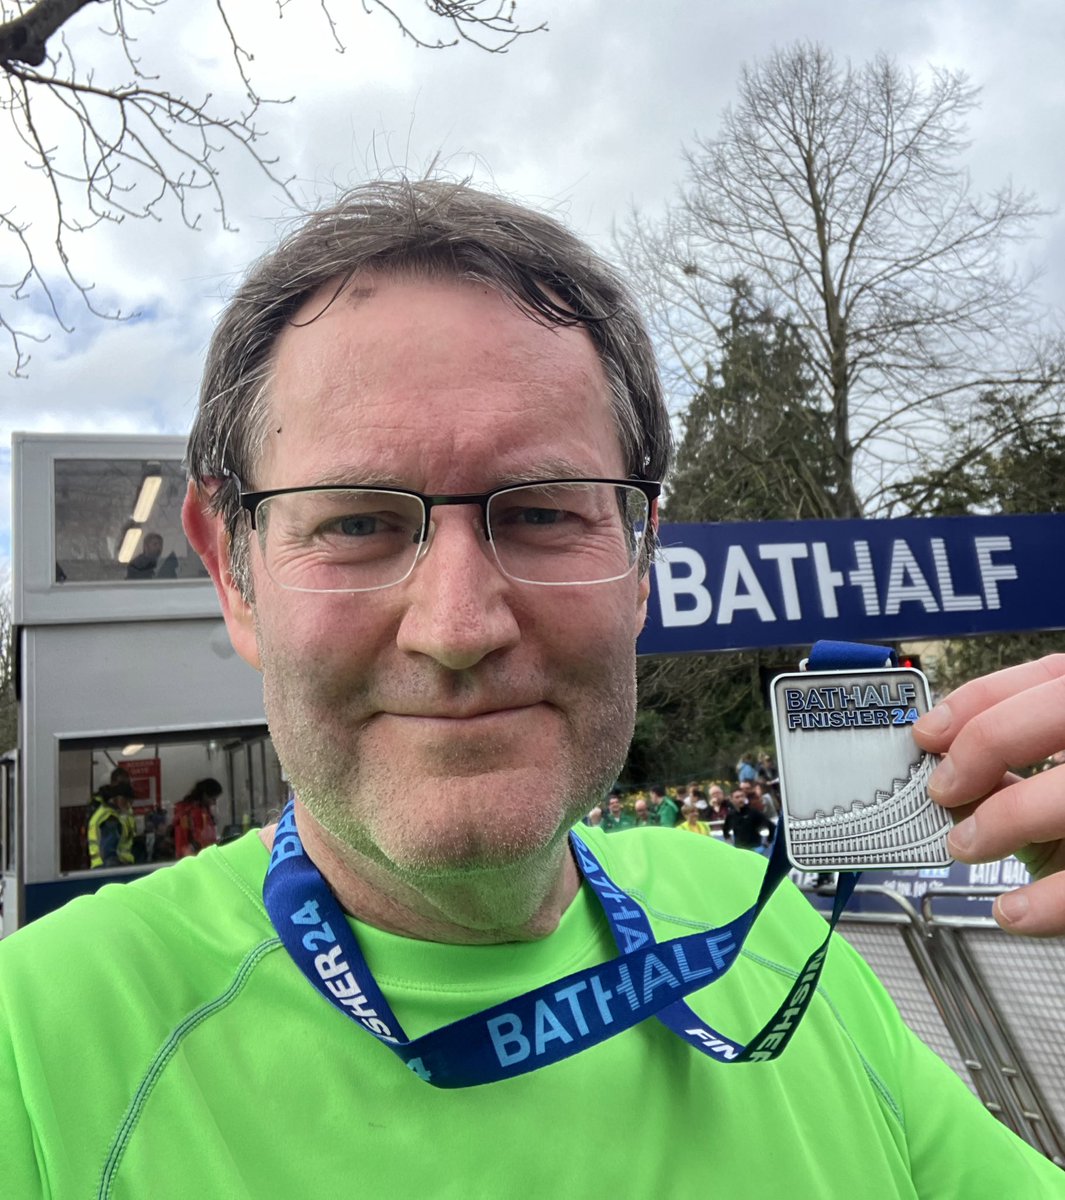 Finally managed to do a half marathon after my previous attempts were derailed by injury and illness. It was particularly frustrating to come down with covid on the eve of race last year. #BathHalf 1/